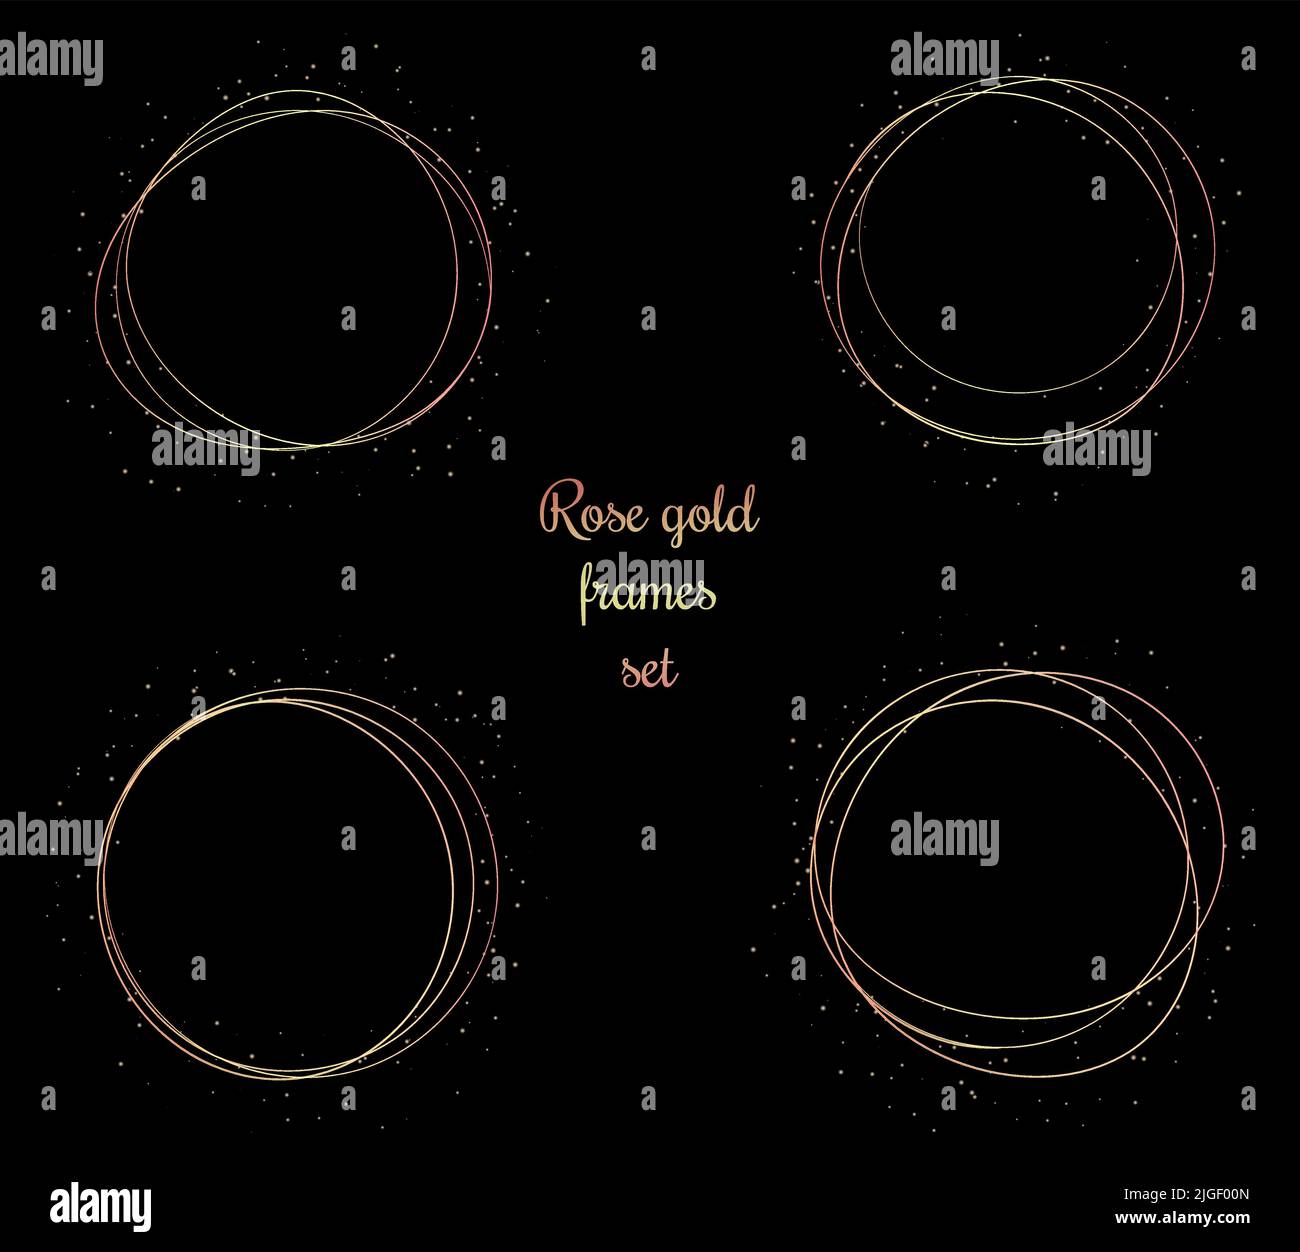 Hand drawn rose gold circular frames set, isolated on black. Metallic decorative elements with sparkles. Stock Vector